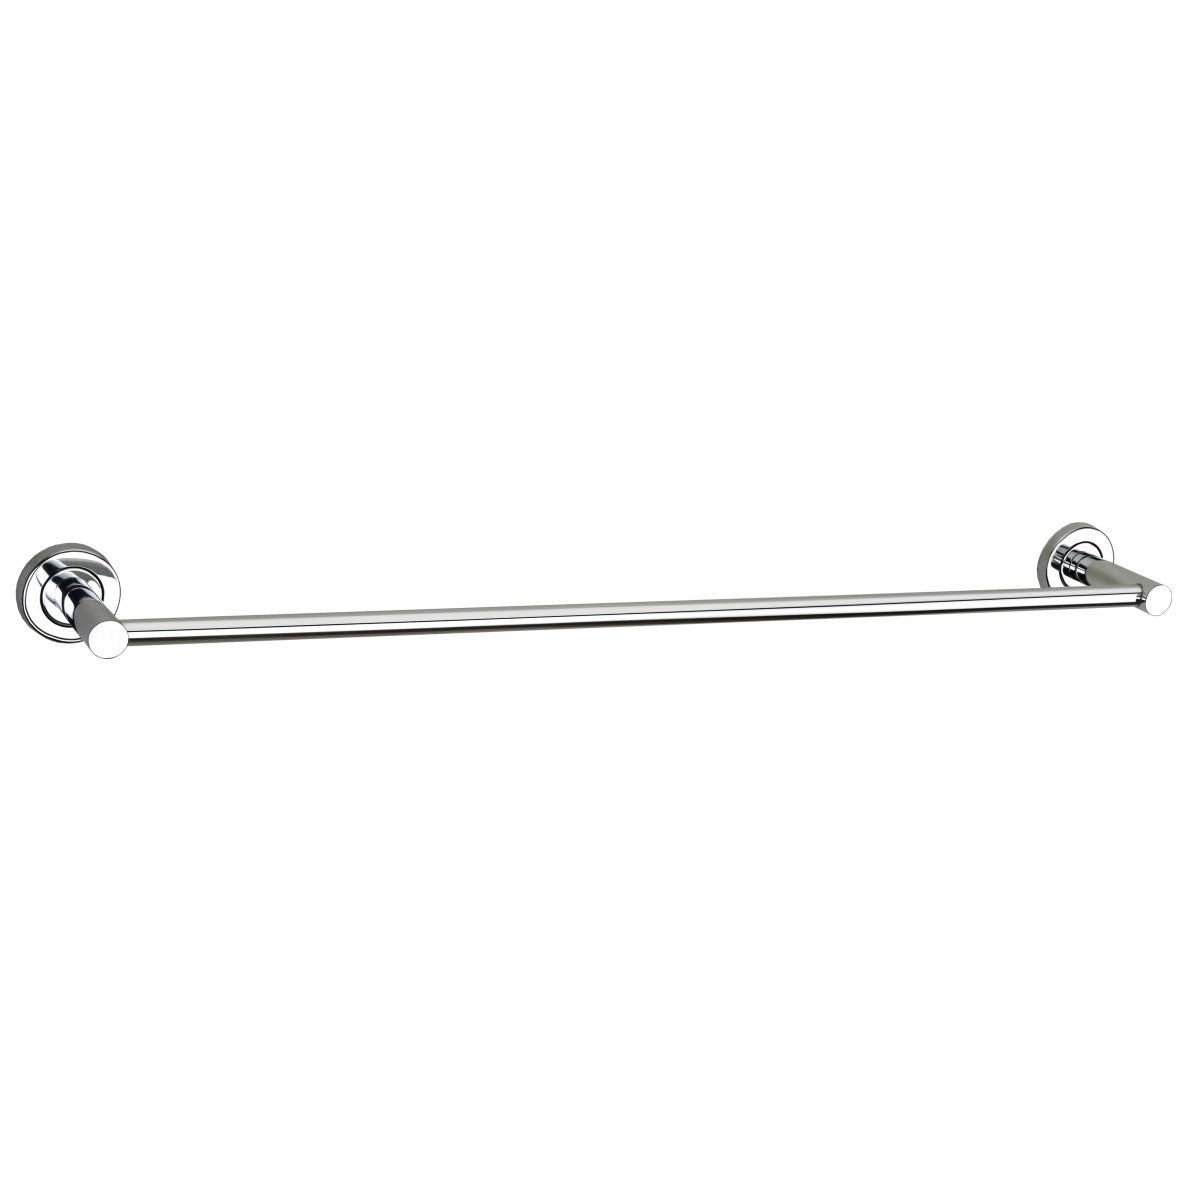 Plantex Stainless Steel Heavy Towel Rod/Towel Rack for Bathroom/Towel Bar/Hanger/Stand/Bathroom Accessories (24 Inch - Chrome Finish) - Pack of 3